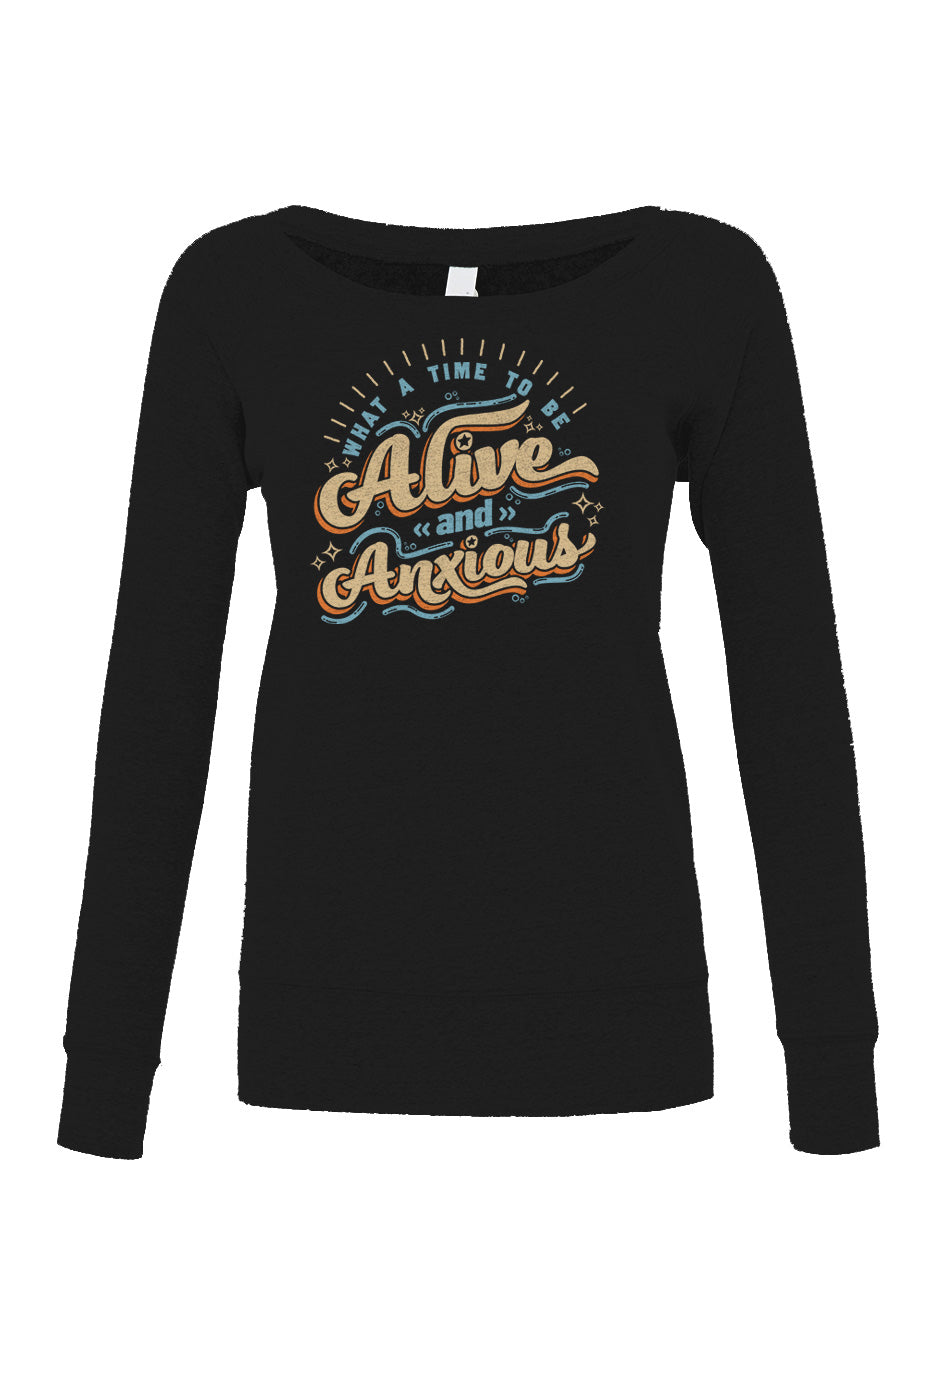 Women's What a Time to be Alive and Anxious Scoop Neck Fleece